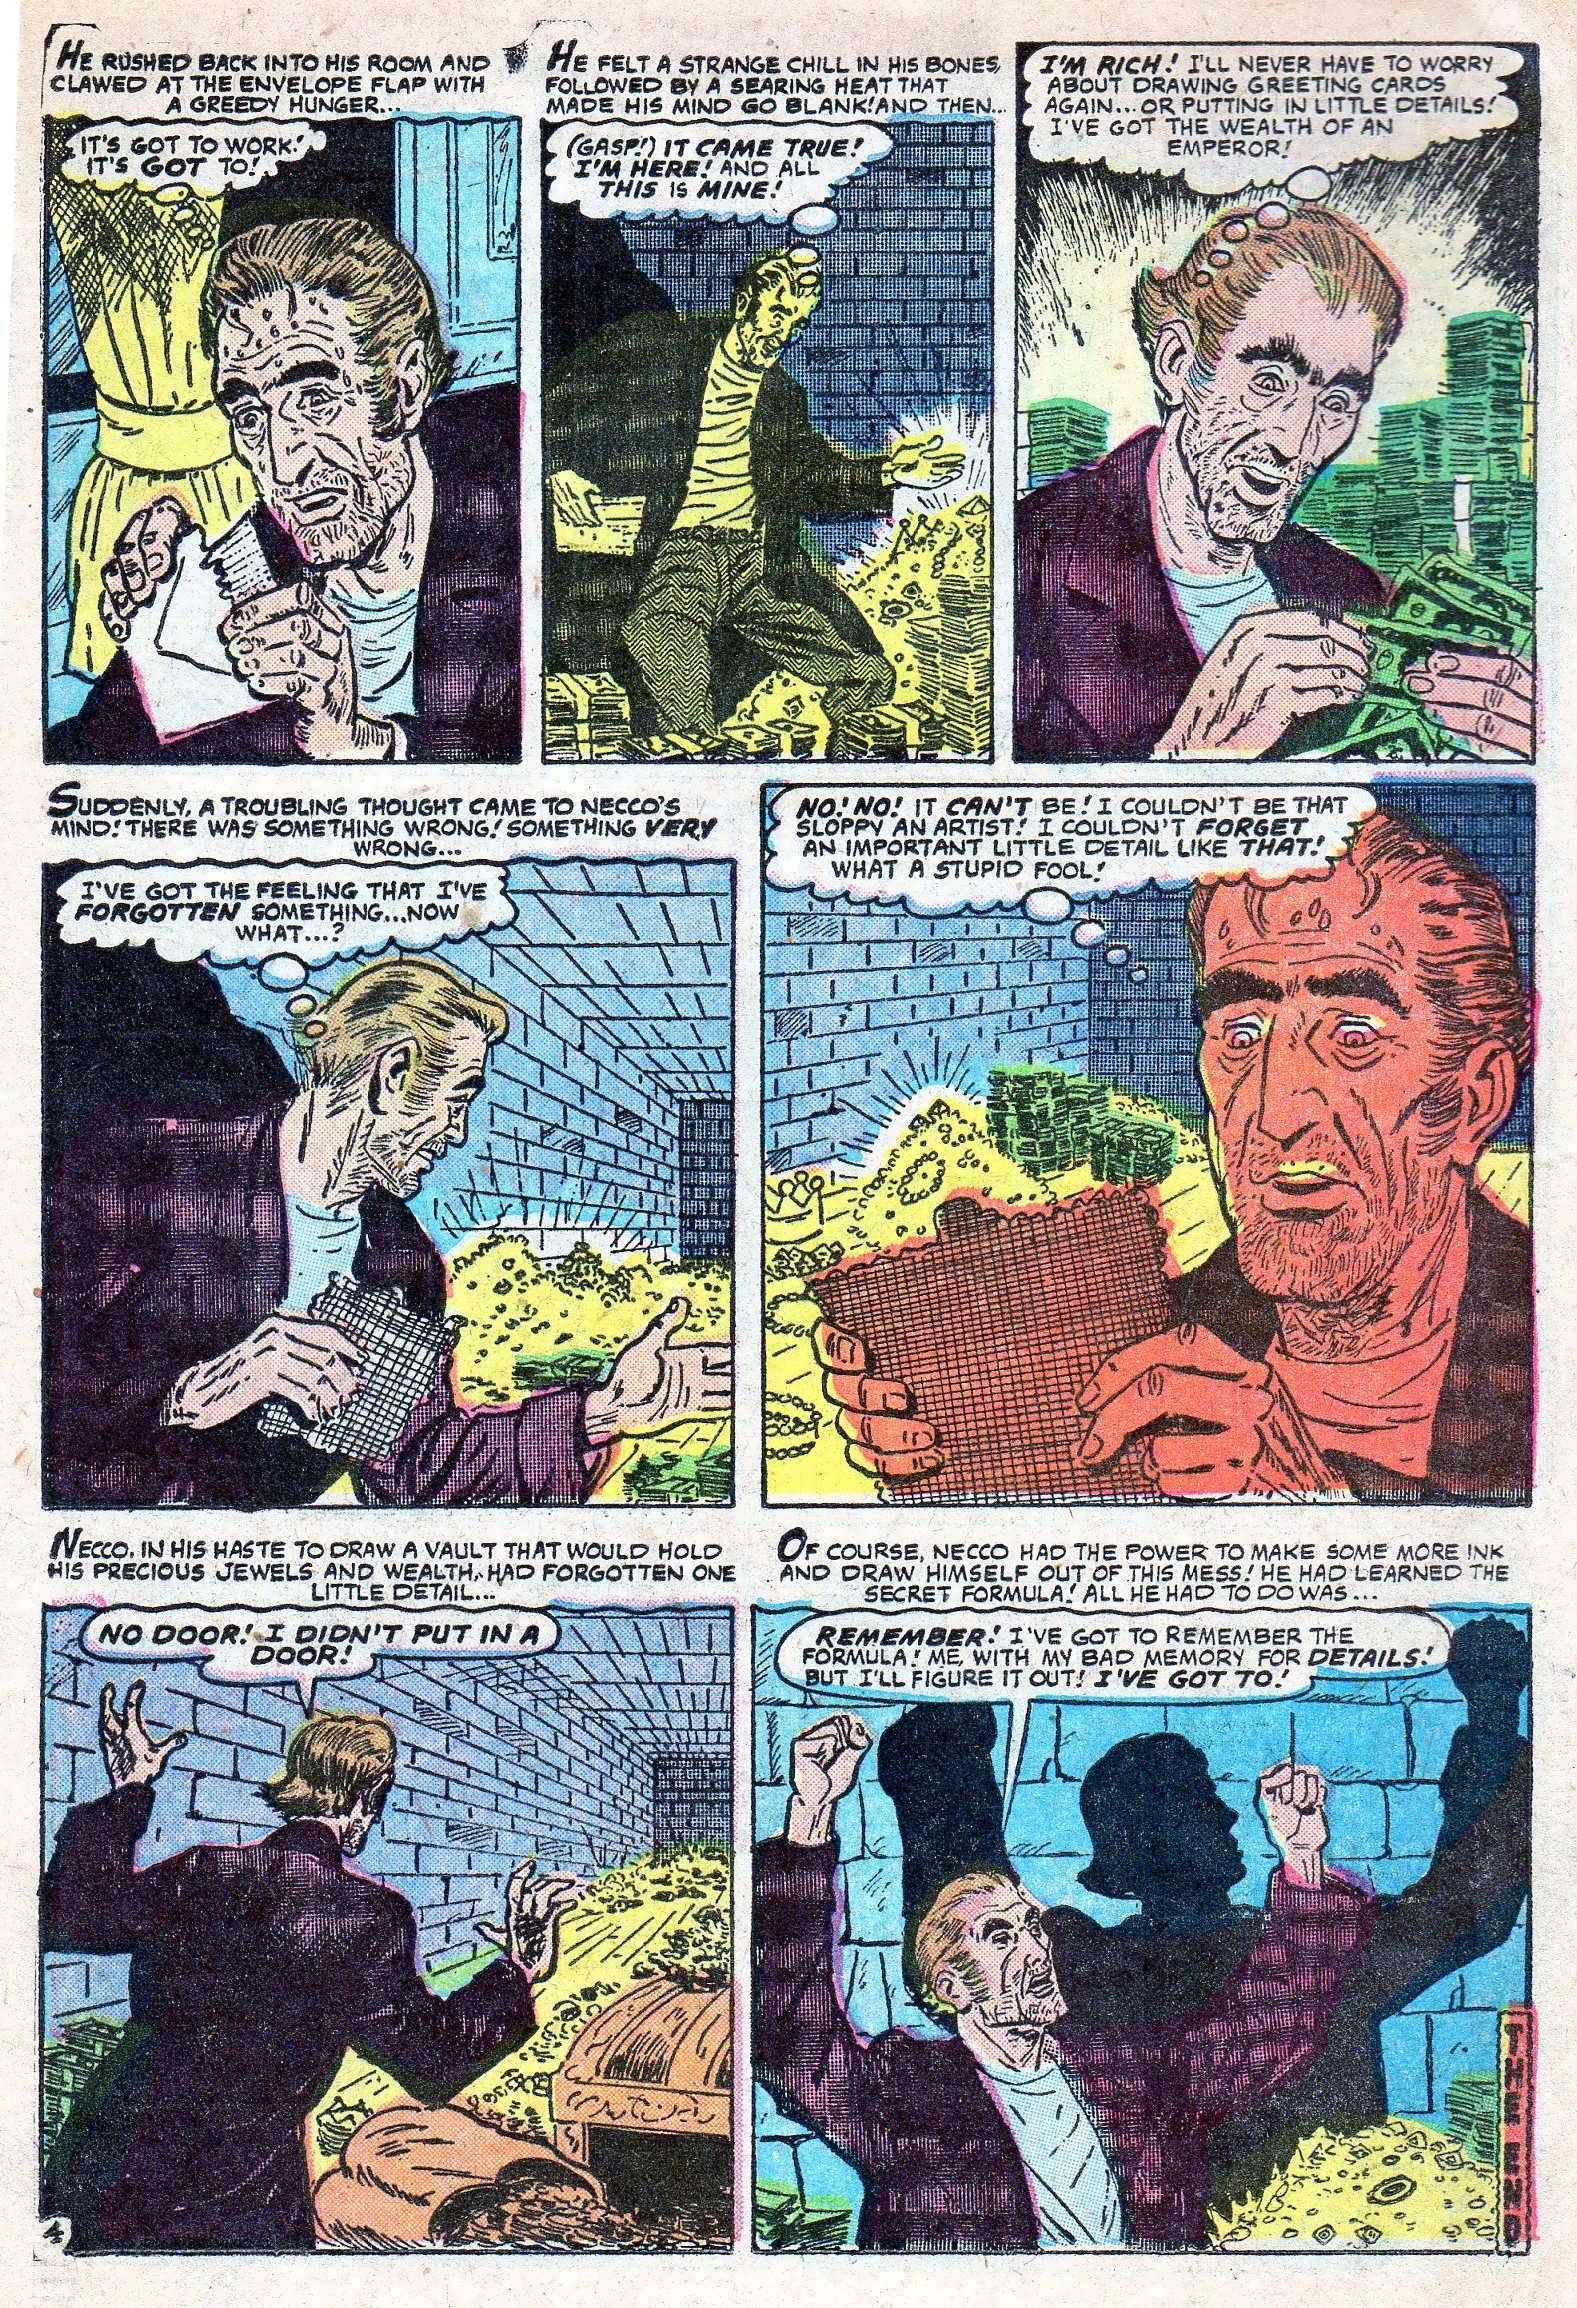 Marvel Tales (1949) 159 Page 15